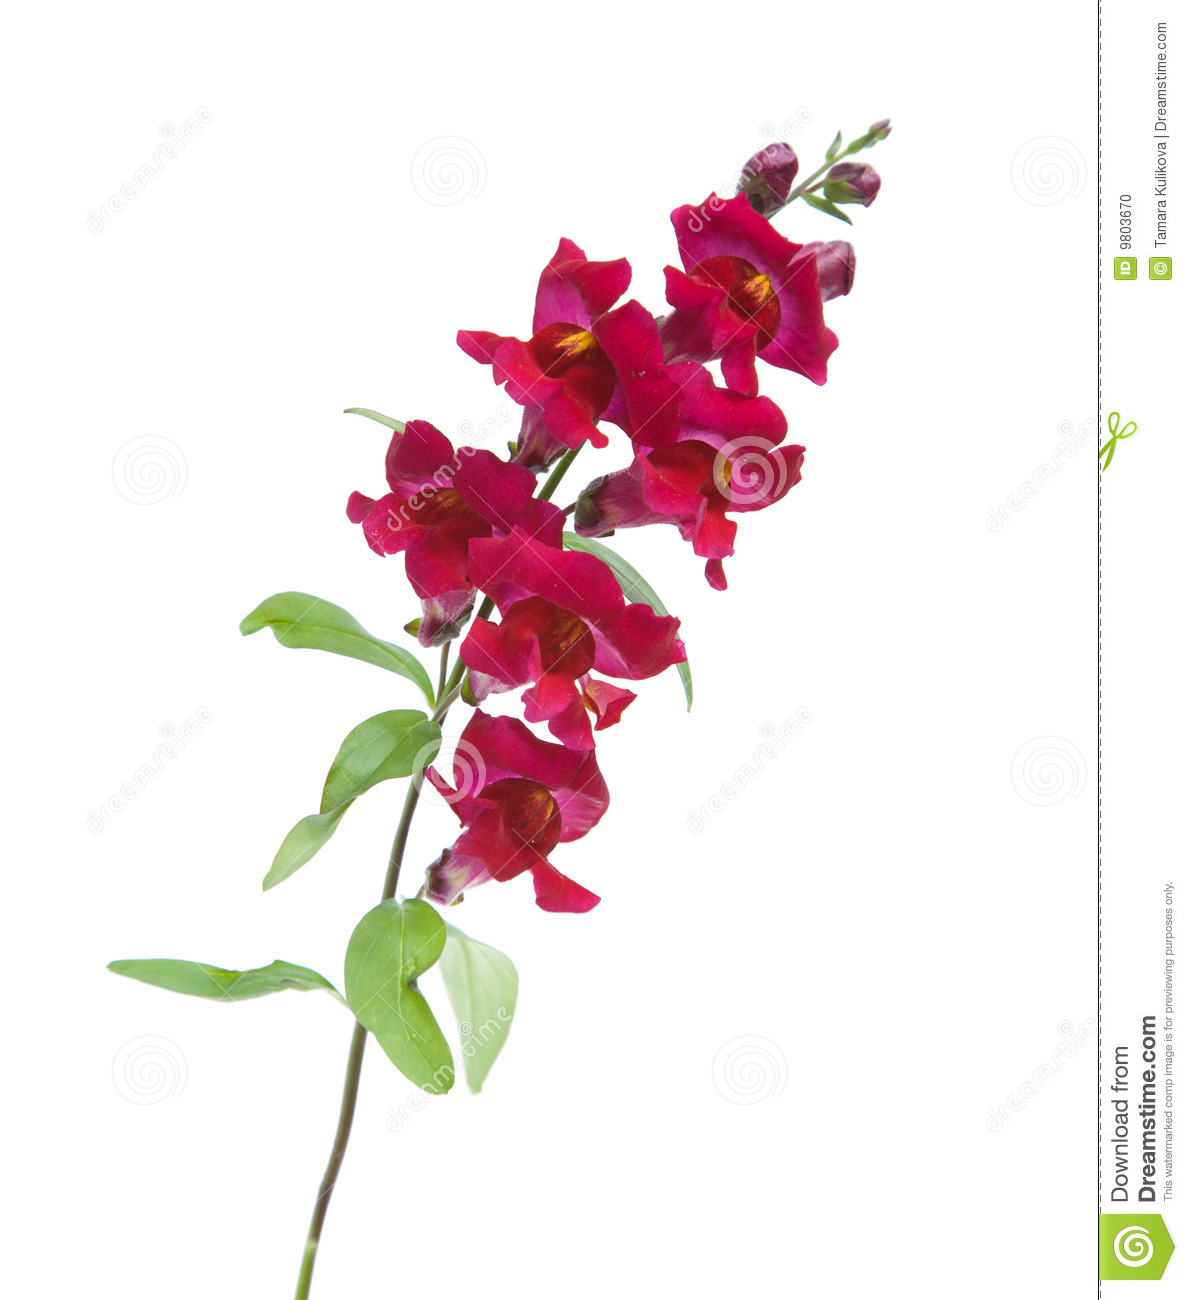 Snapdragons clipart #11, Download drawings